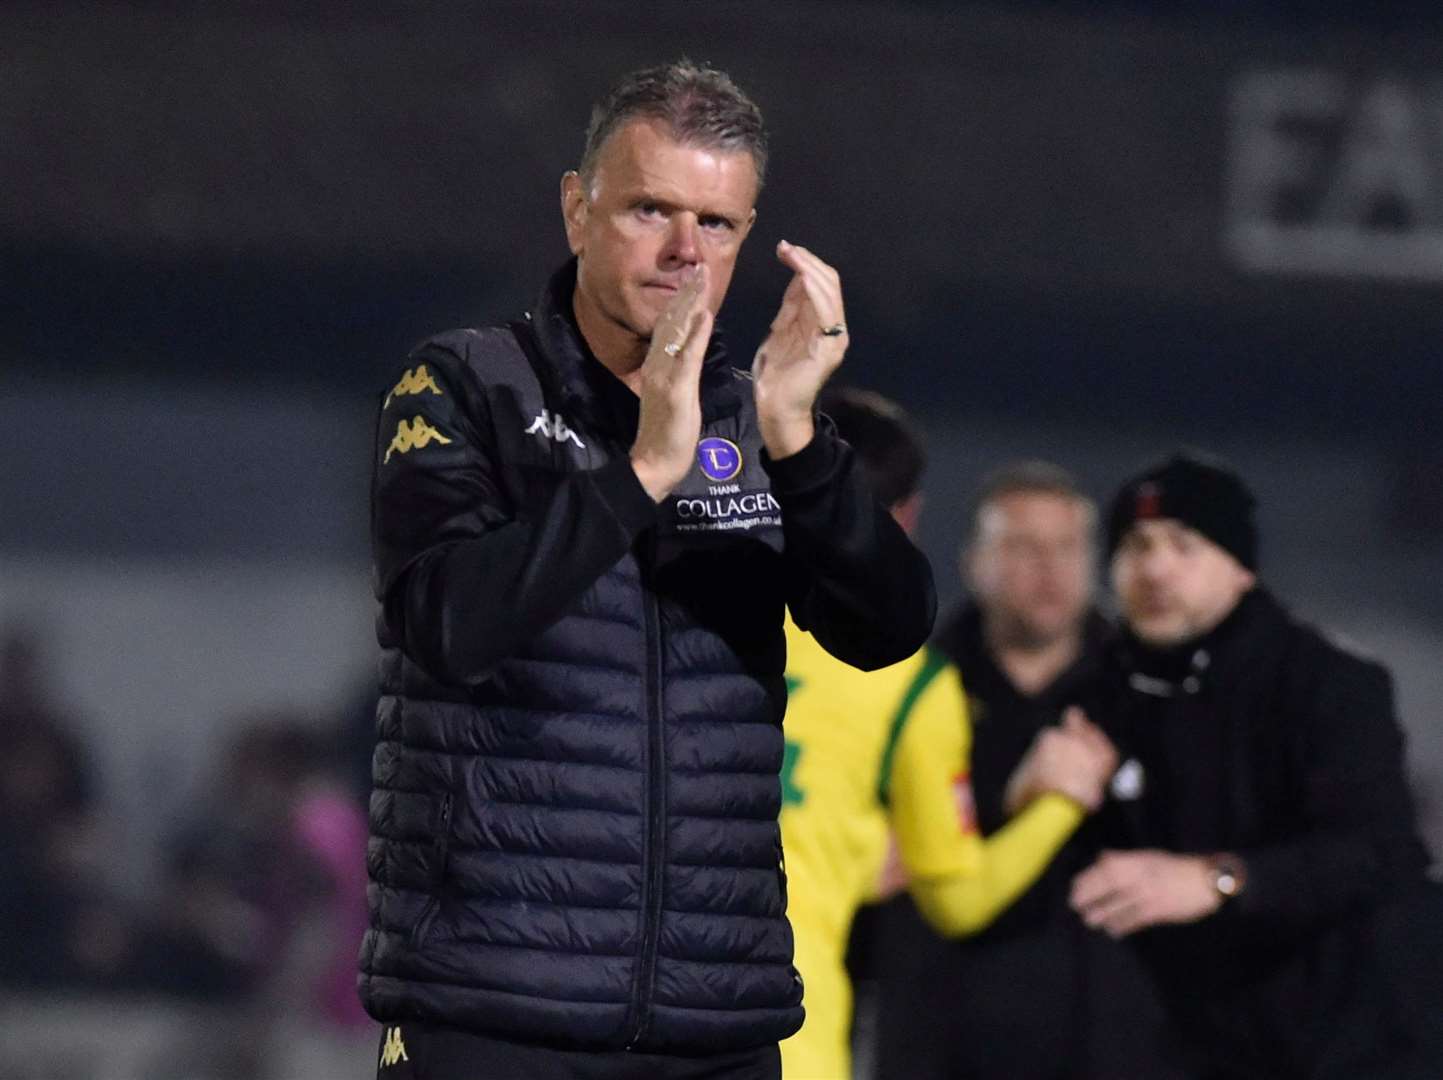 Dejected Faversham boss Tommy Warrilow applauds the fans after again suffering play-off heartache. Picture: Ian Scammell